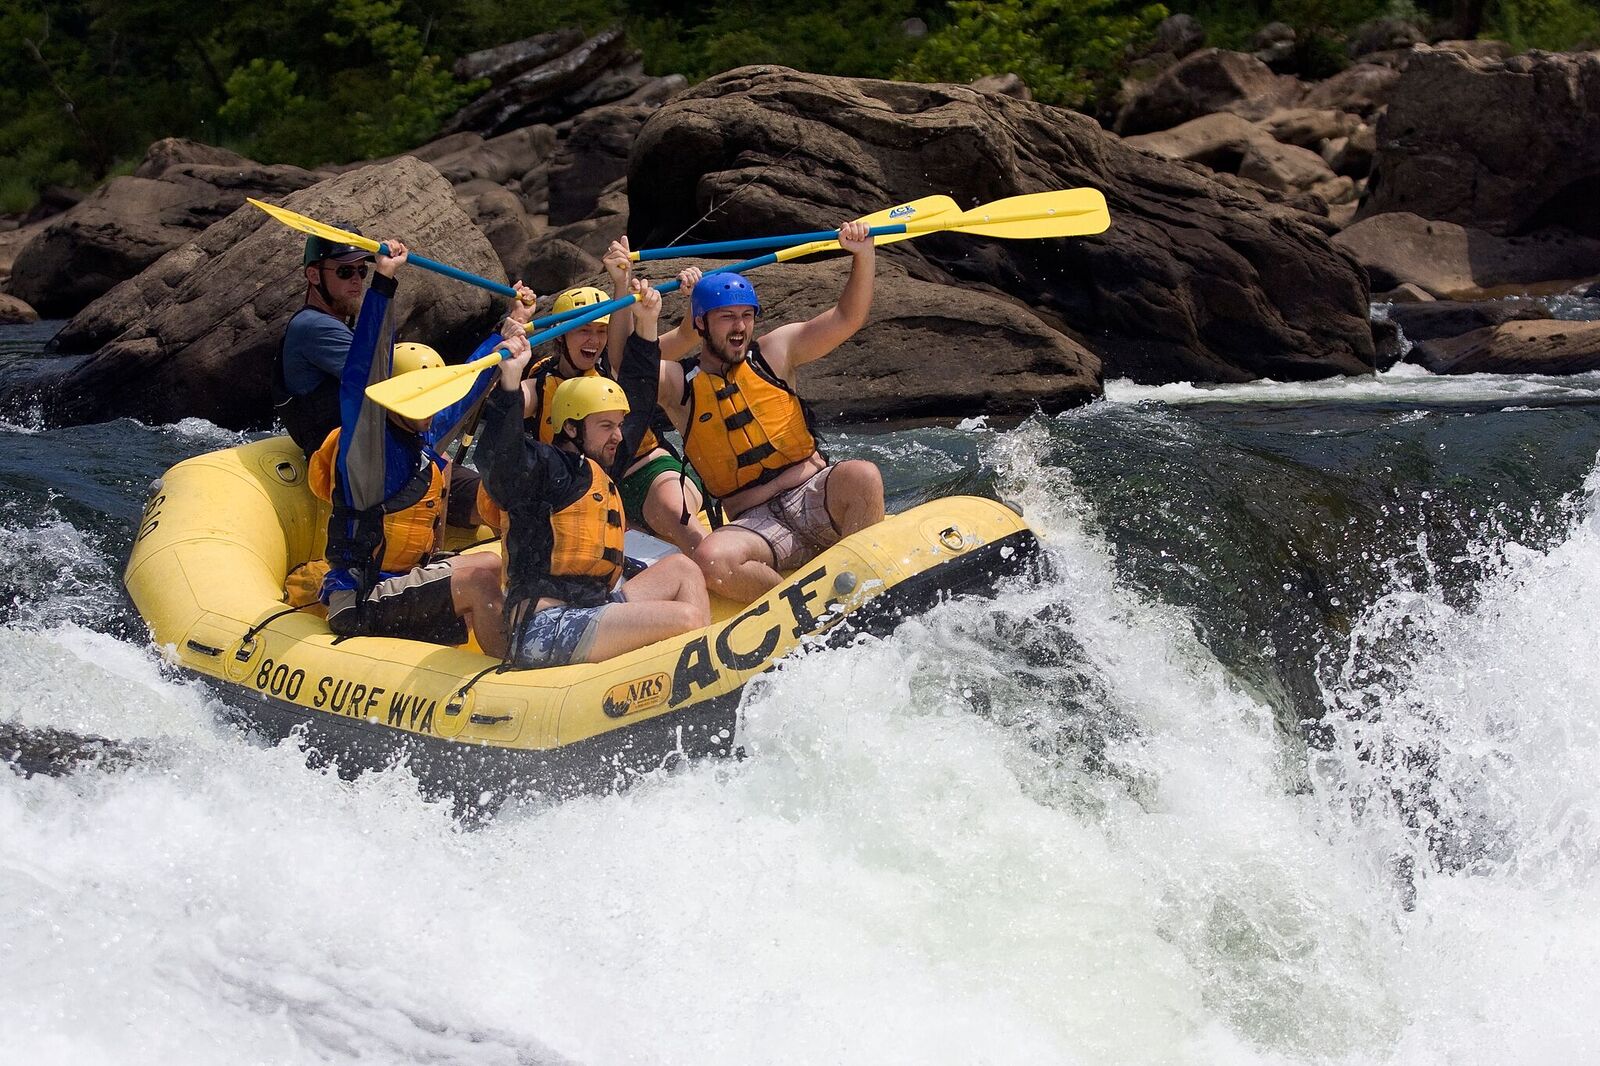 Adventure Activities, Adventure Resorts of America, Adventure River, Kayaking in WV, Mountain and river adventures campground, New and Gauley River Adventures, New River Bridge, New River Gorge West Virginia/WV, White Water Adventures, Whitewater Kayaking